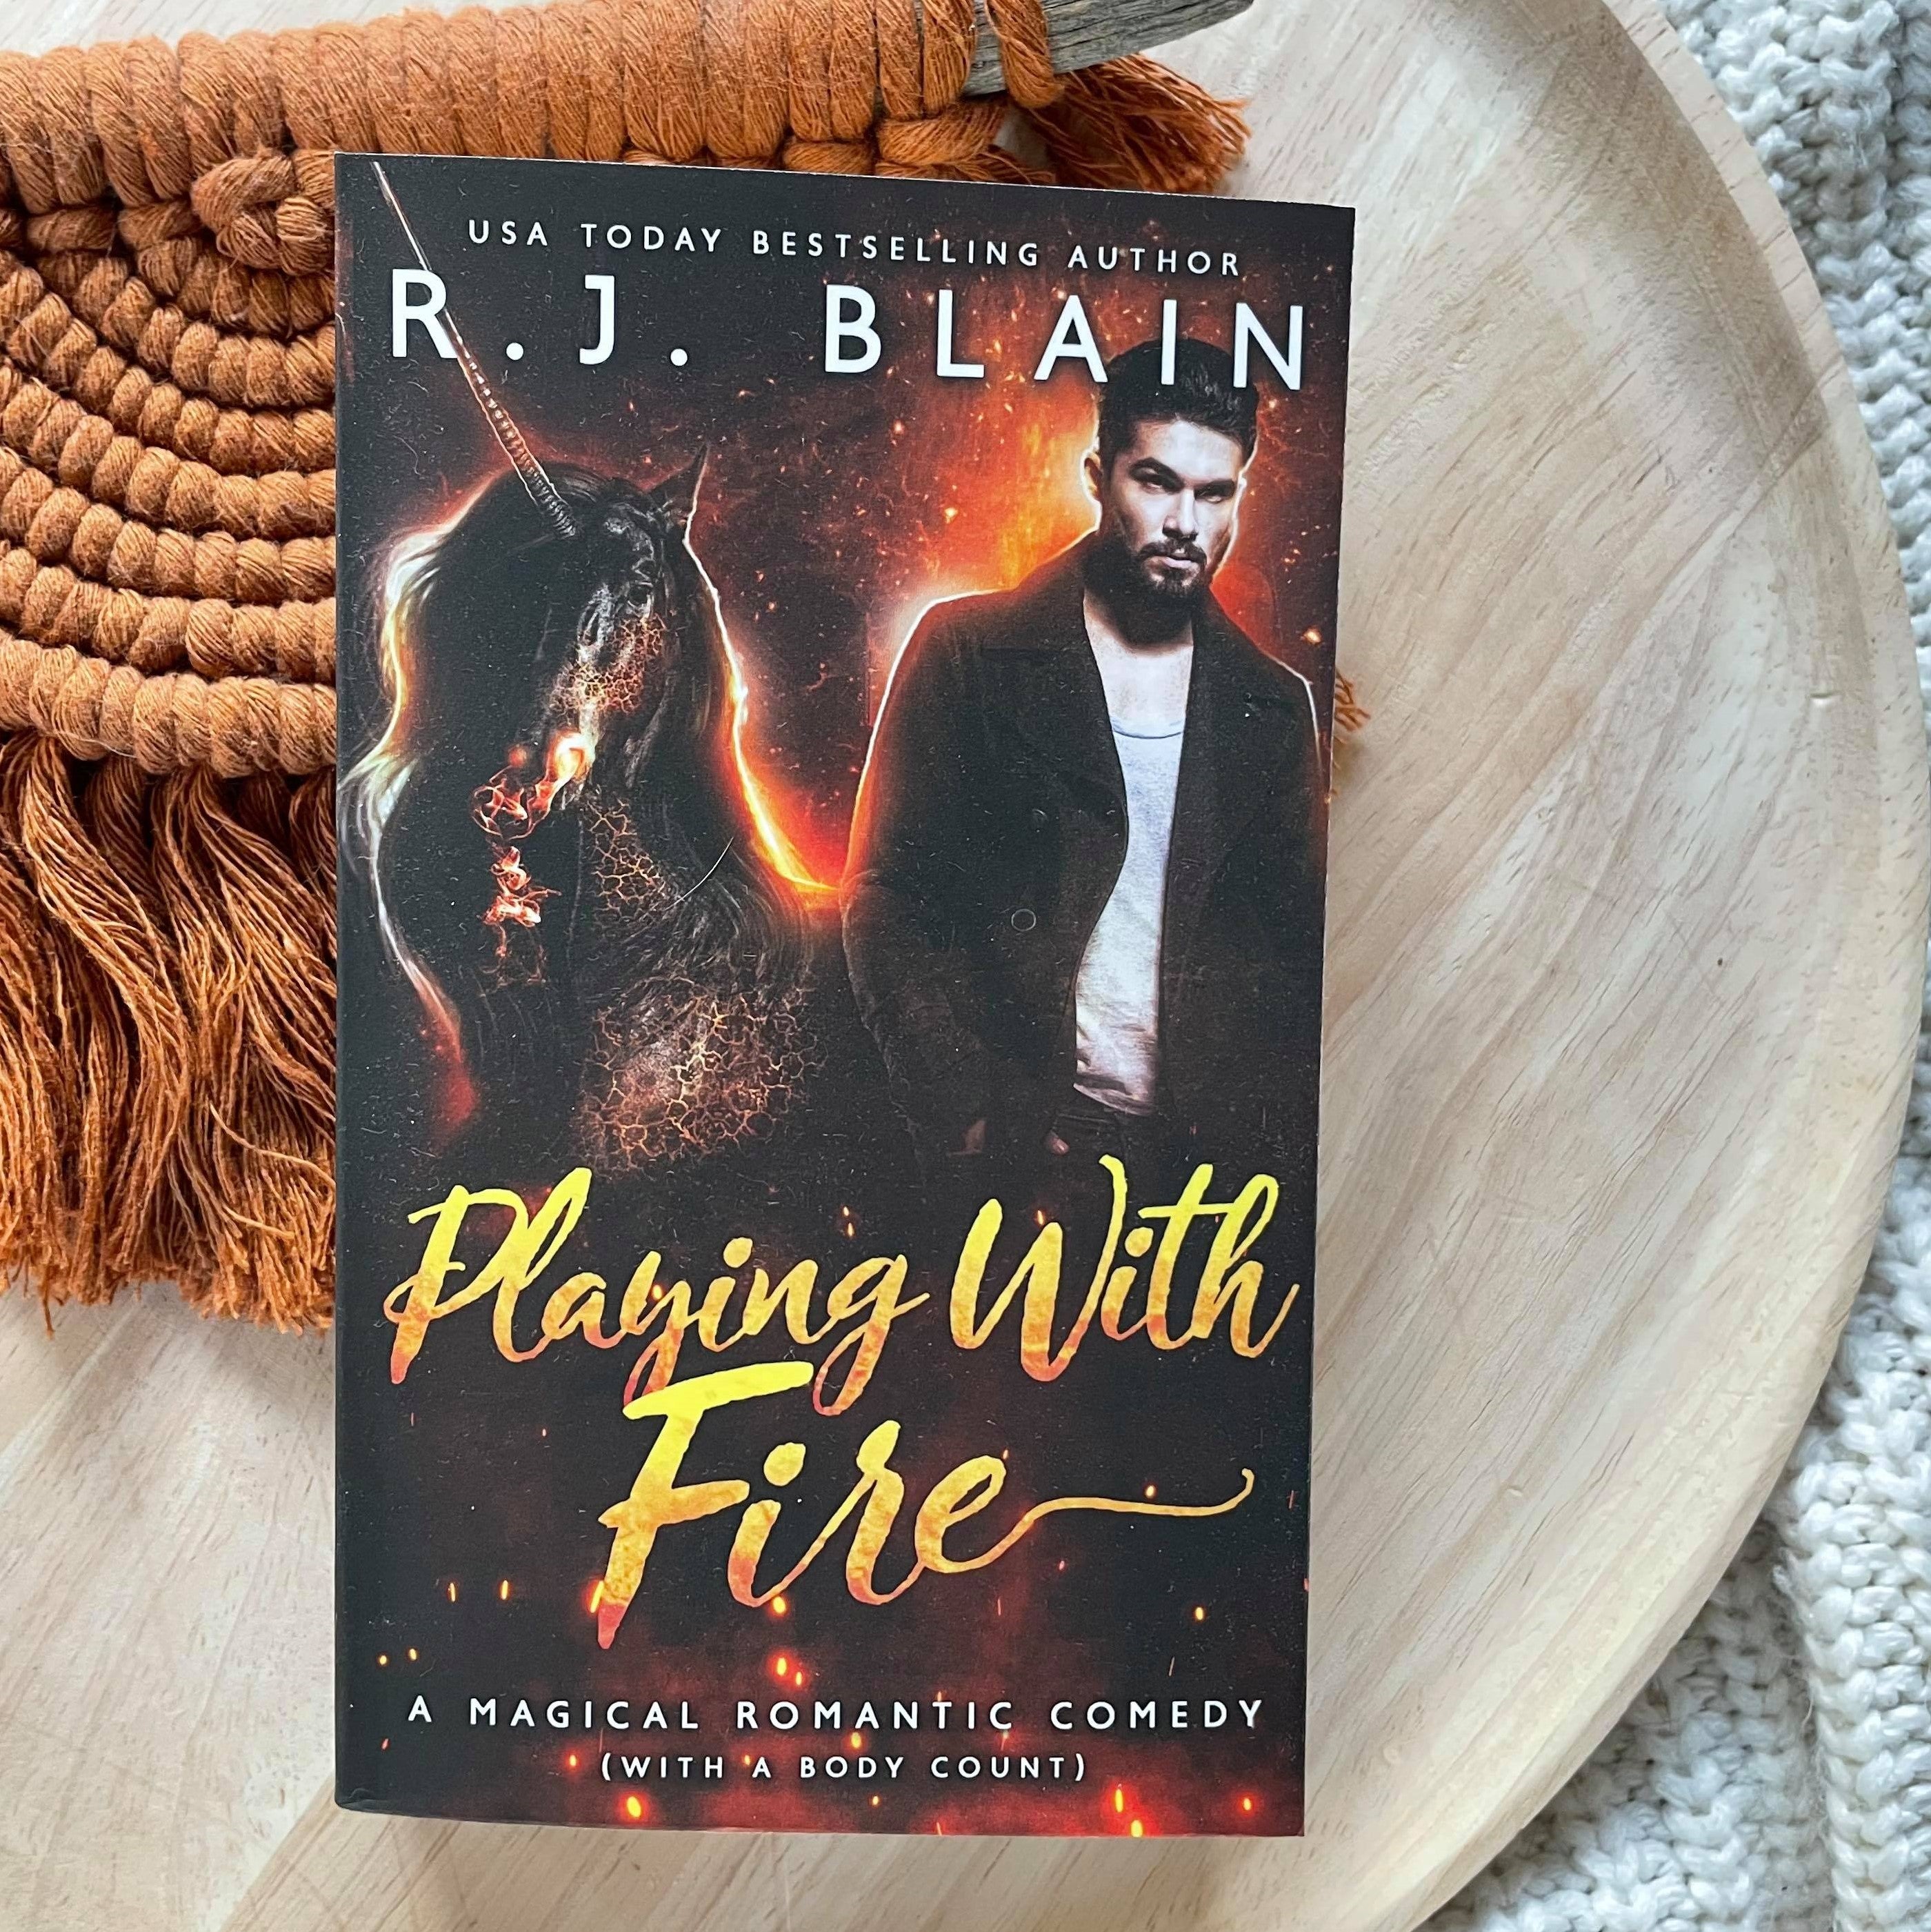 A Magical Romantic Comedy (with a body count) by R. J. Blain